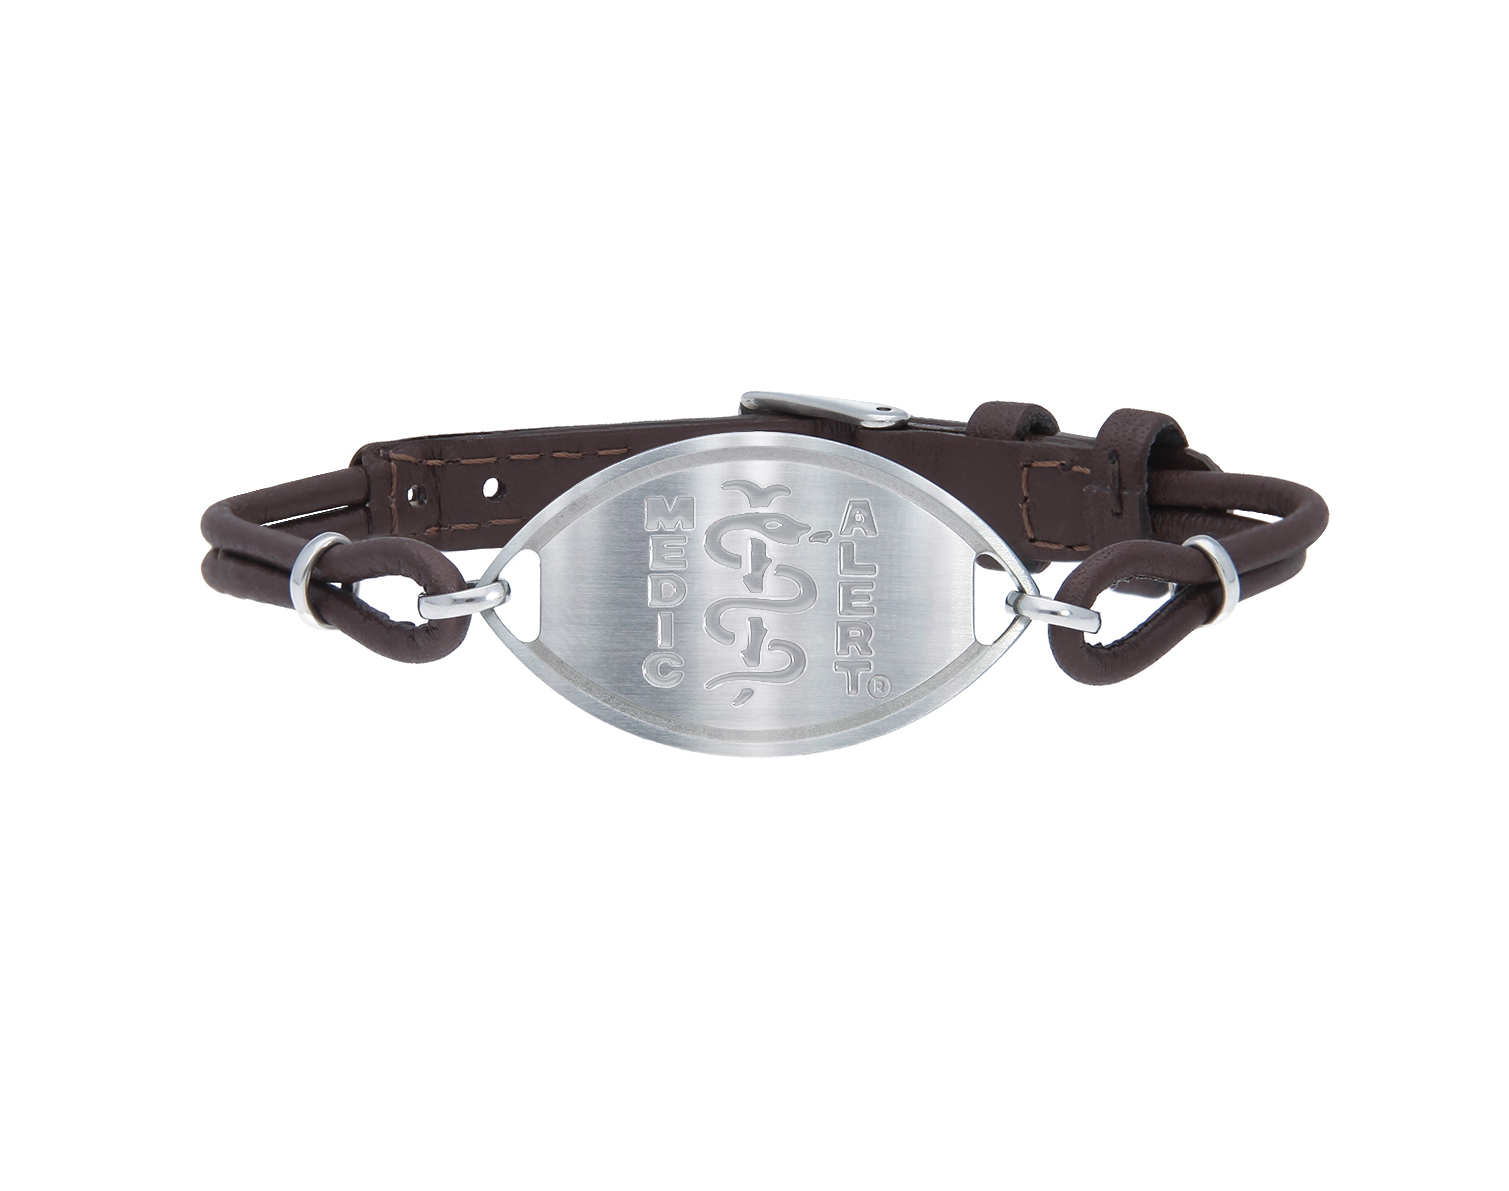 Brown leather strap for wrist with metal elliptical disc with a MedicAlert logo which includes the universal medical sign of a snake wrapped around a rod.